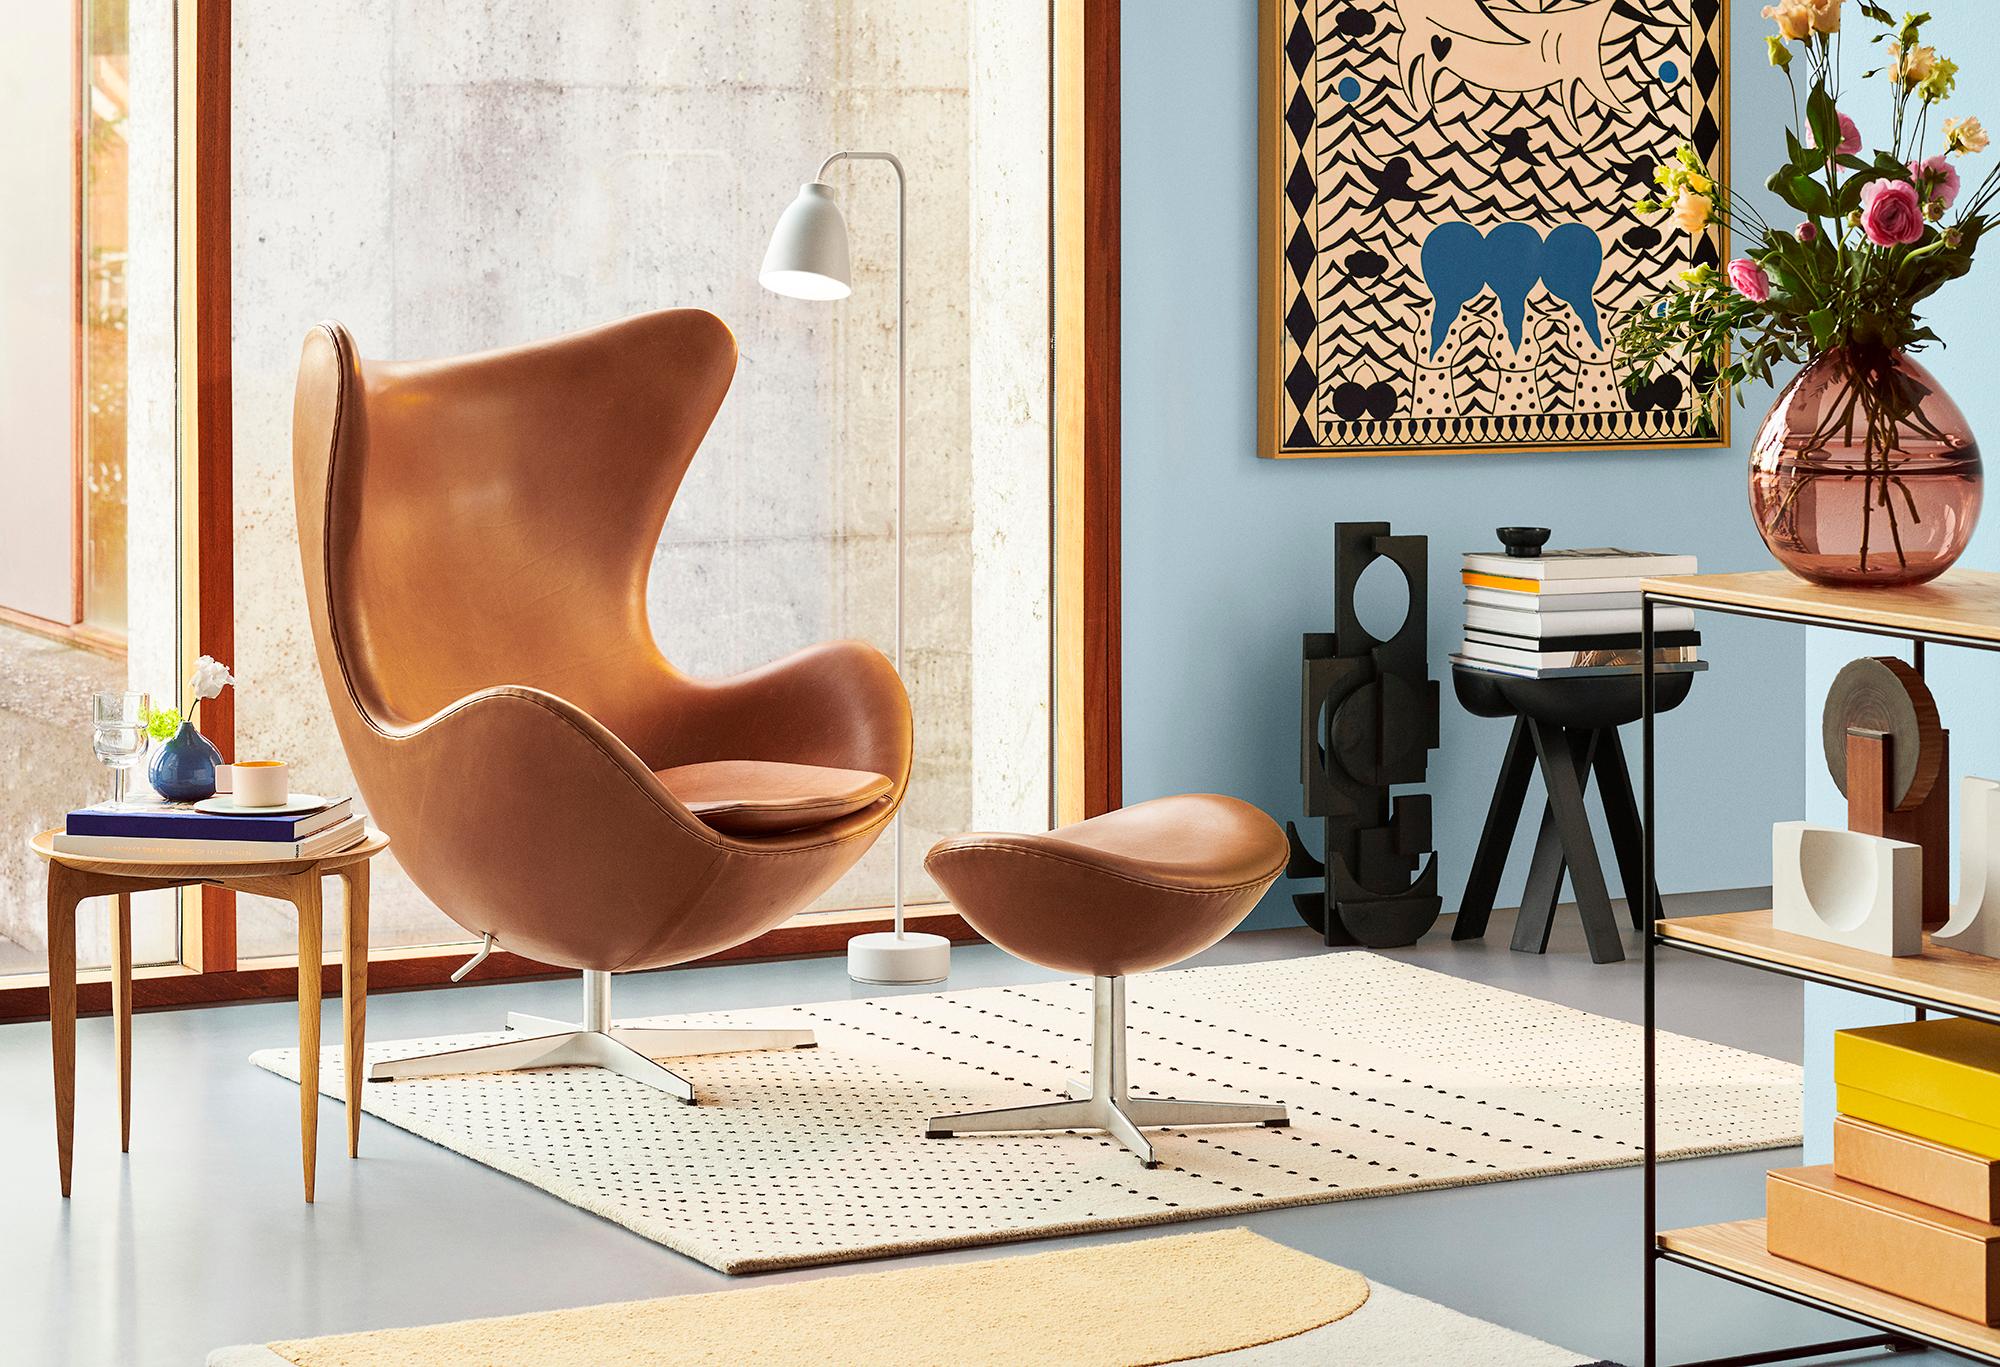 Arne Jacobsen 'Egg' Chair for Fritz Hansen in Leather Upholstery (Cat. 5).

Established in 1872, Fritz Hansen has become synonymous with legendary Danish design. Combining timeless craftsmanship with an emphasis on sustainability, the brand’s